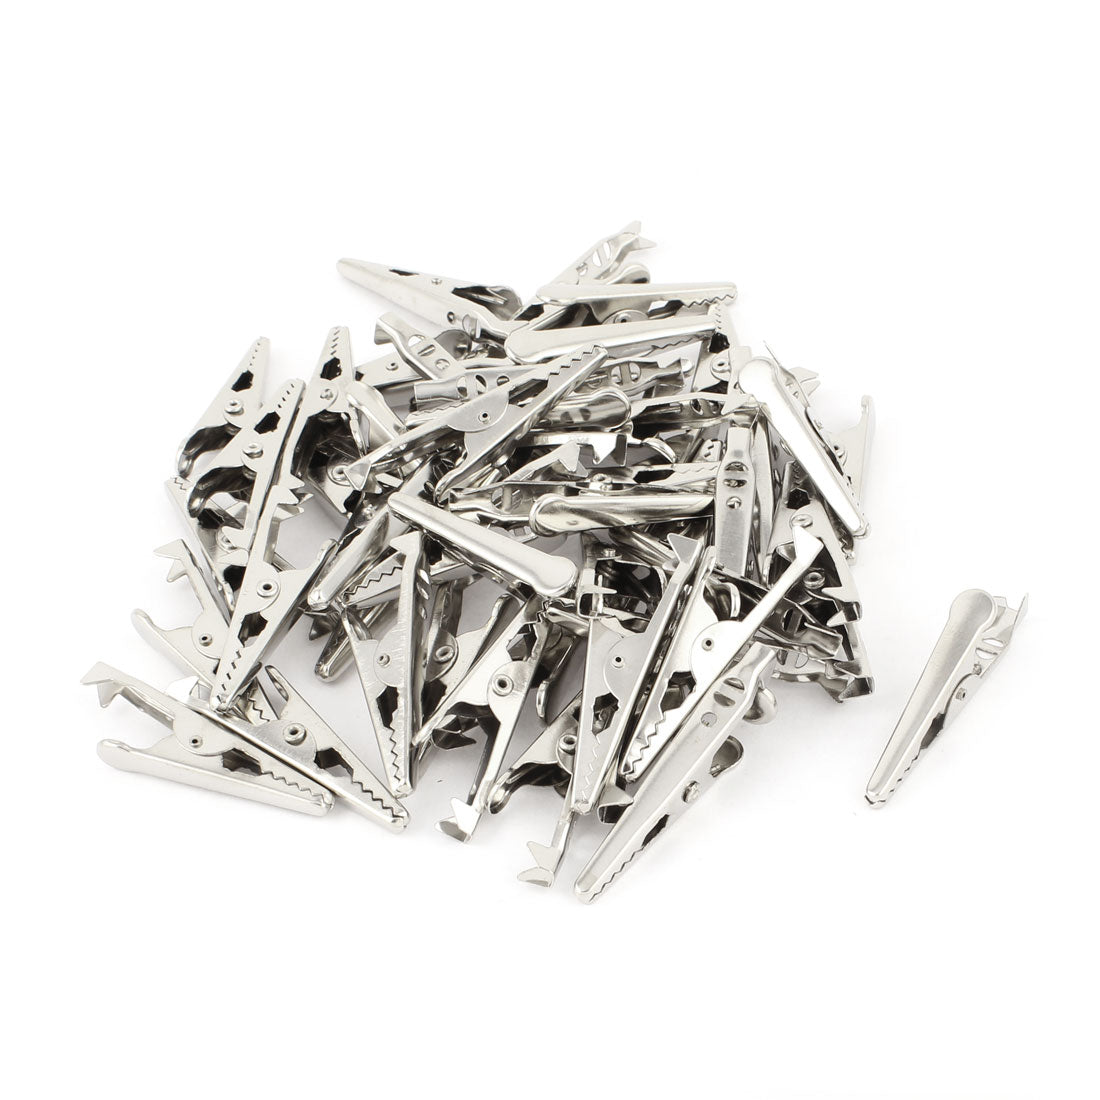 uxcell Uxcell 50 Pcs Metal Uninsulated Test Work Alligator Clips Crocodile Clamps 43mm Long